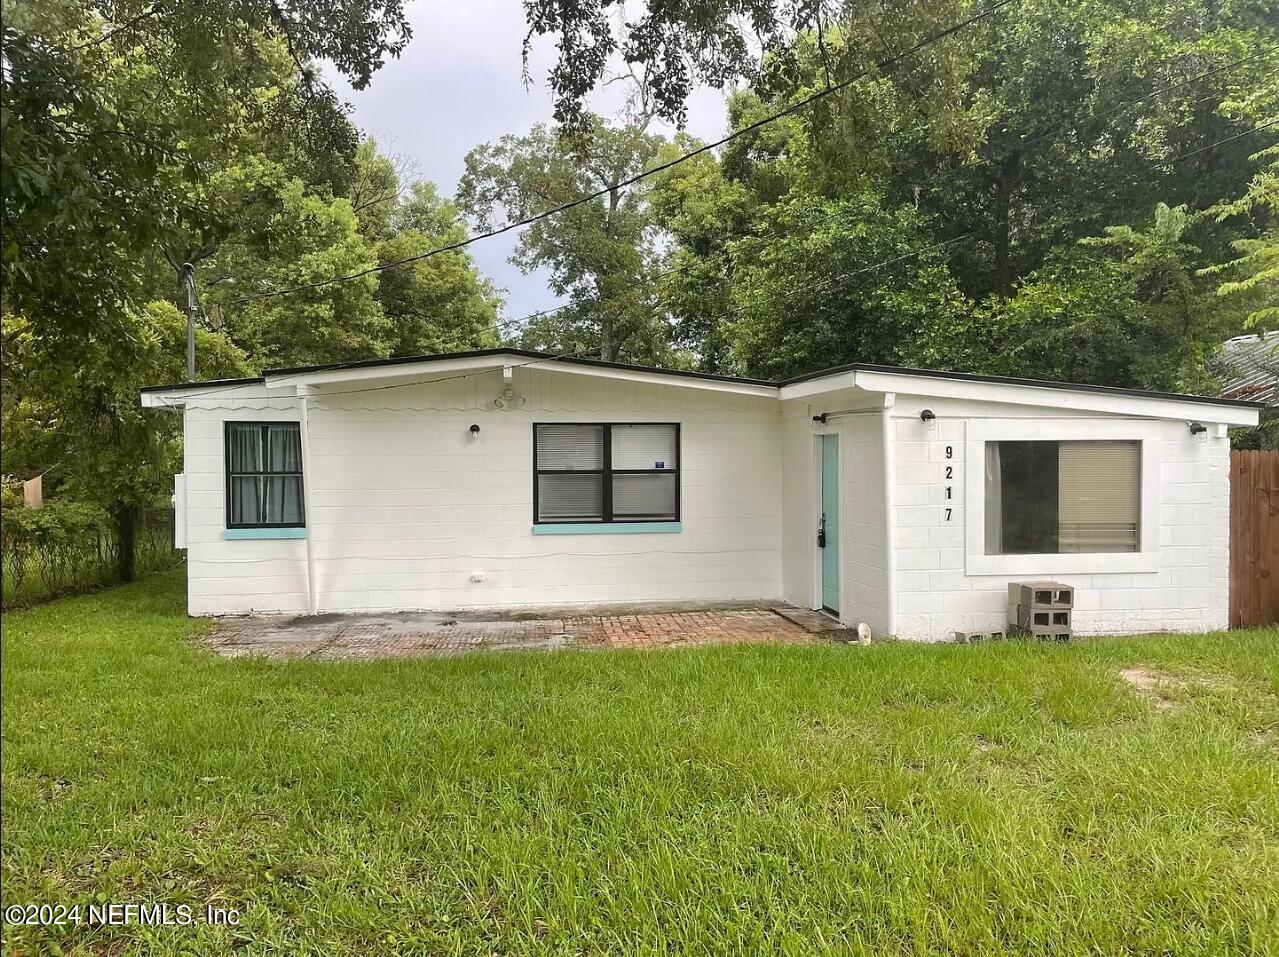 Jacksonville, FL home for sale located at 9217 6th Avenue, Jacksonville, FL 32208